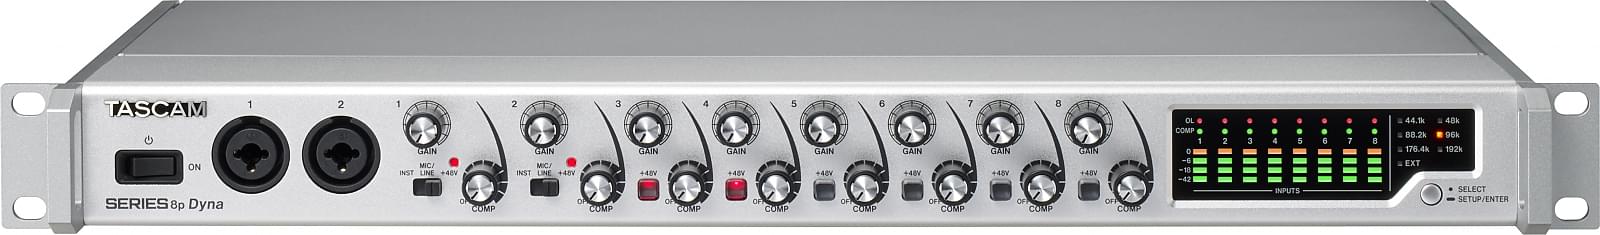 8-Channel A/D Converter and Mic Preamp With Analogue Compressor | Tascam SERIES 8p Dyna